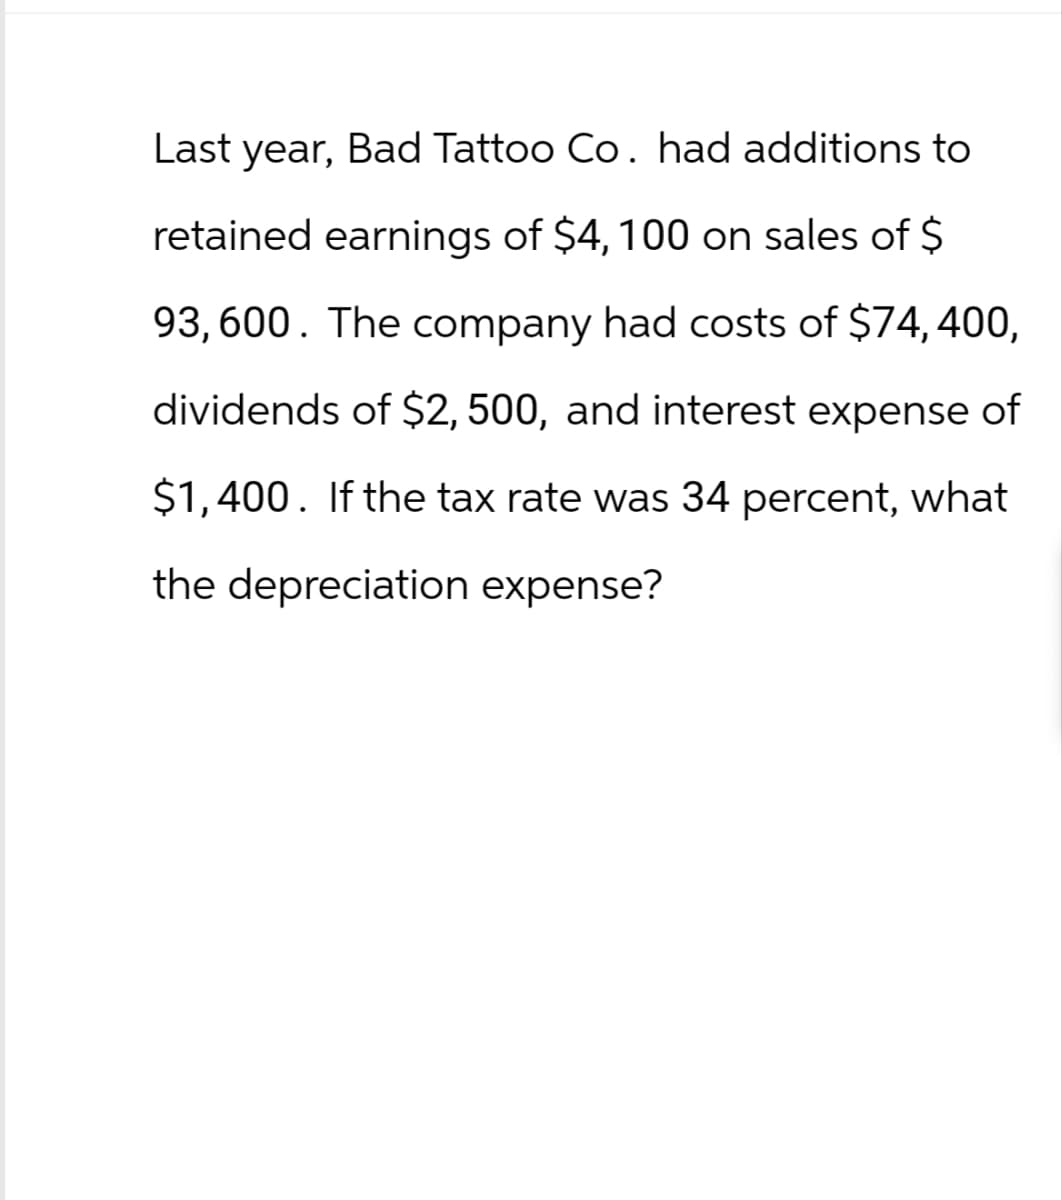 Last year, Bad Tattoo Co. had additions to
retained earnings of $4, 100 on sales of $
93,600. The company had costs of $74,400,
dividends of $2,500, and interest expense of
$1,400. If the tax rate was 34 percent, what
the depreciation expense?